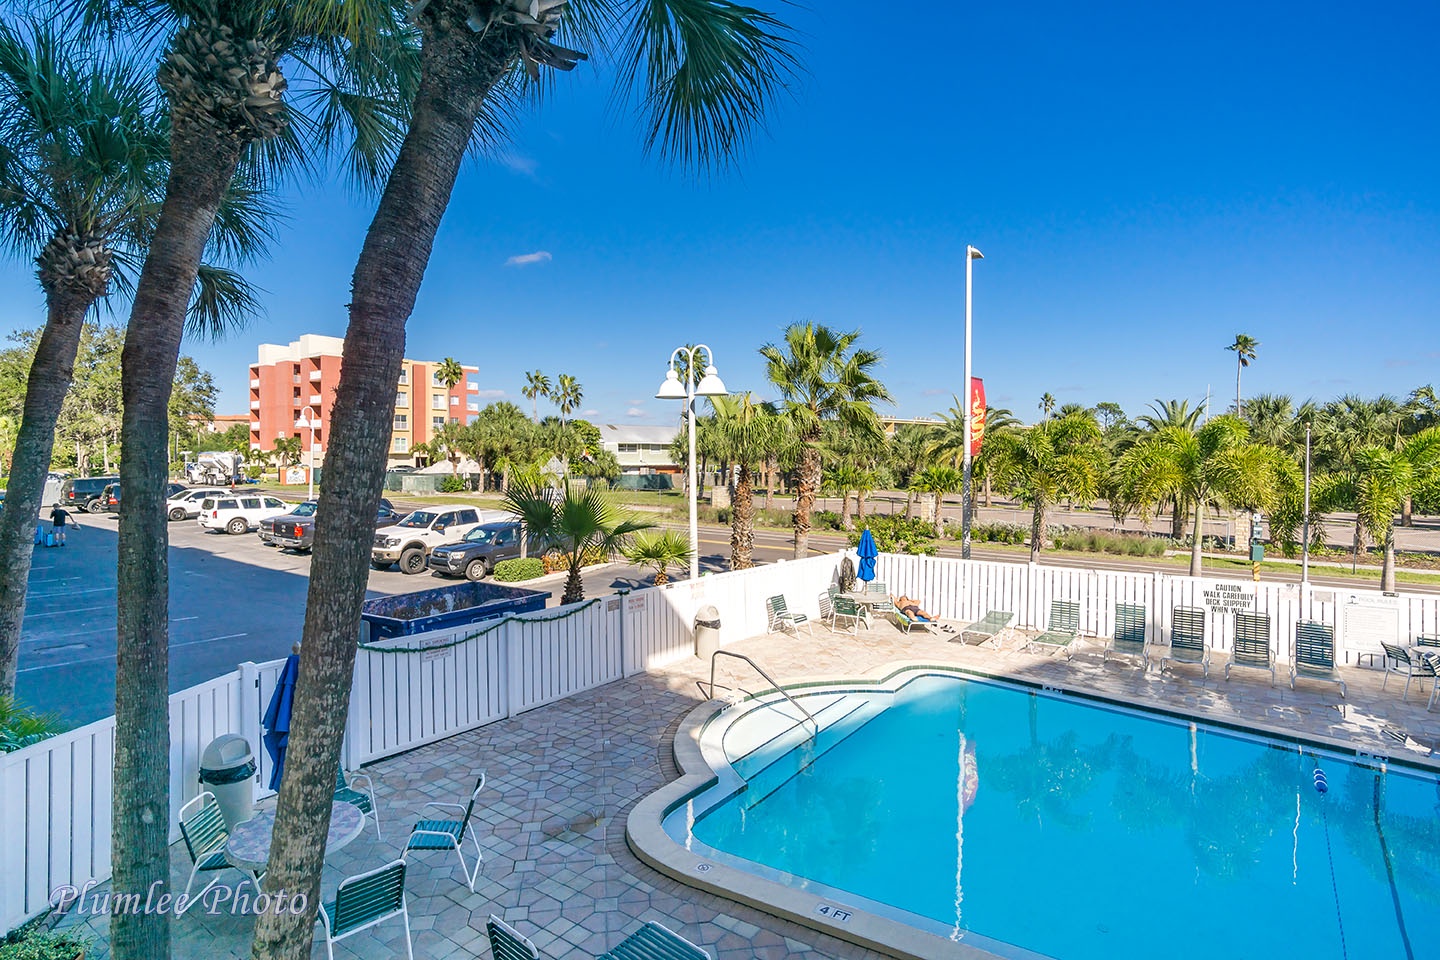 A view of the pool deck and Gulf Blvd.